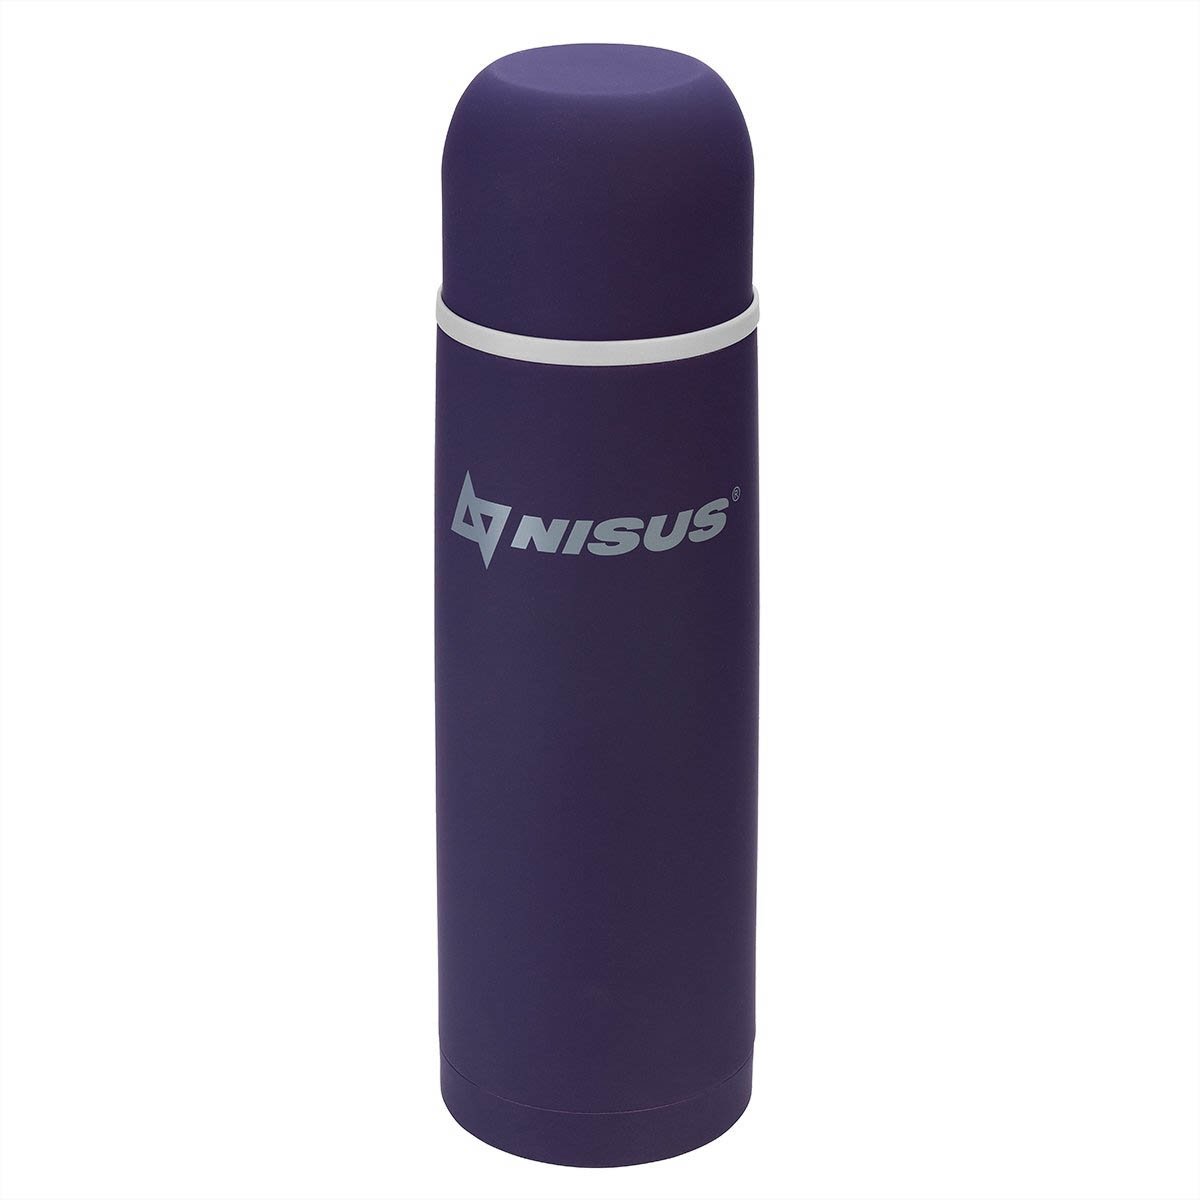 Portable Insulated Water Flask with Strainer, Purple, 25 oz